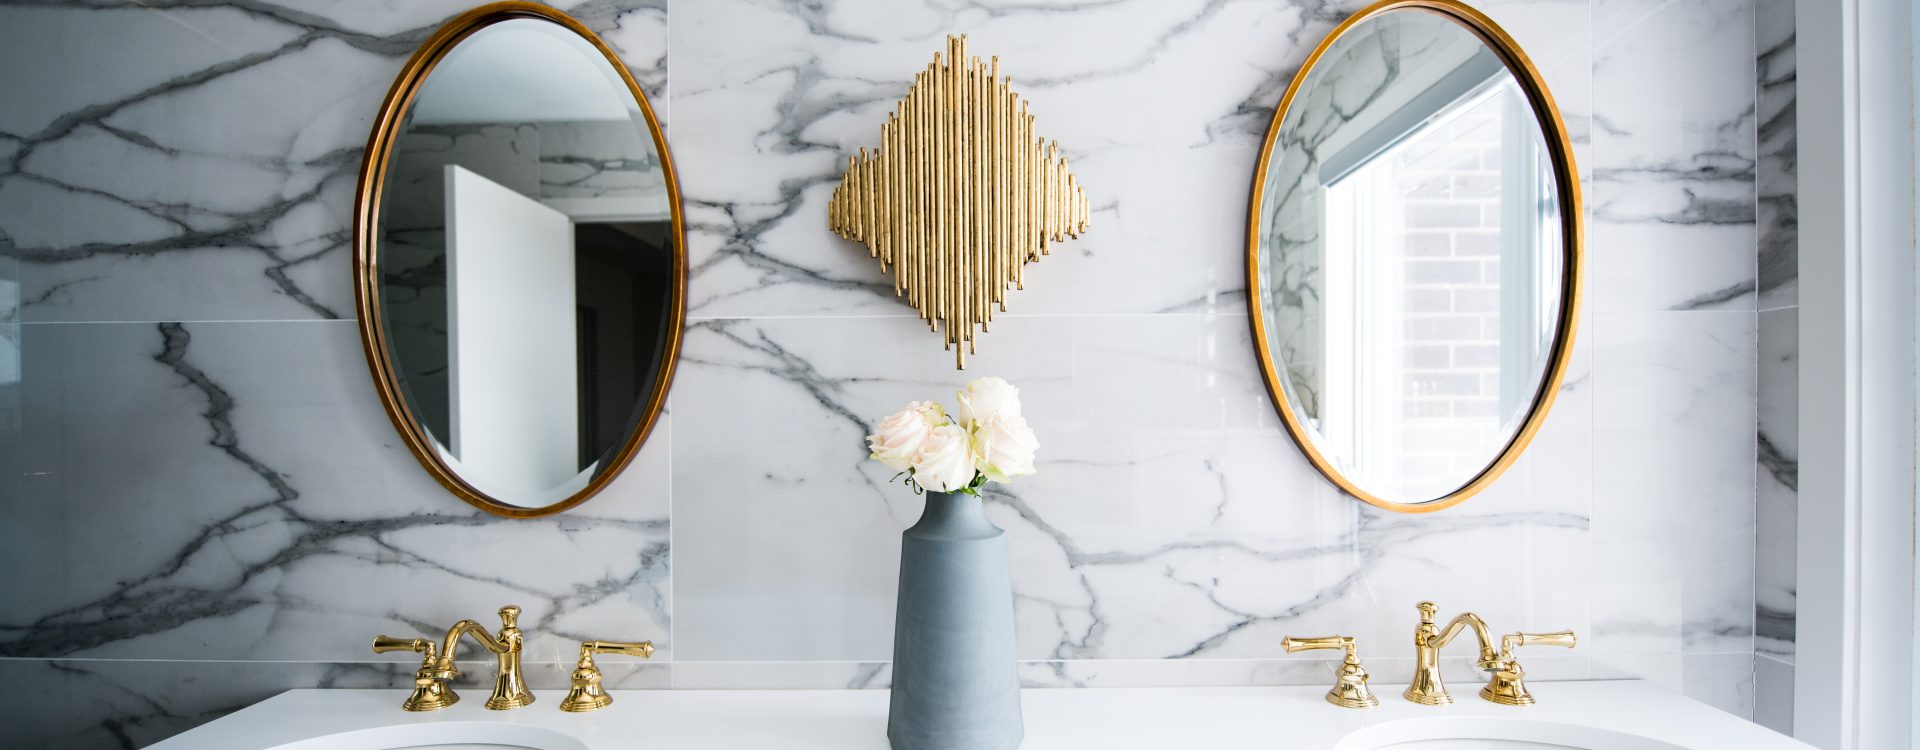 Chic bathroom vanity with marble backdrop, dual round mirrors, and gold accents.